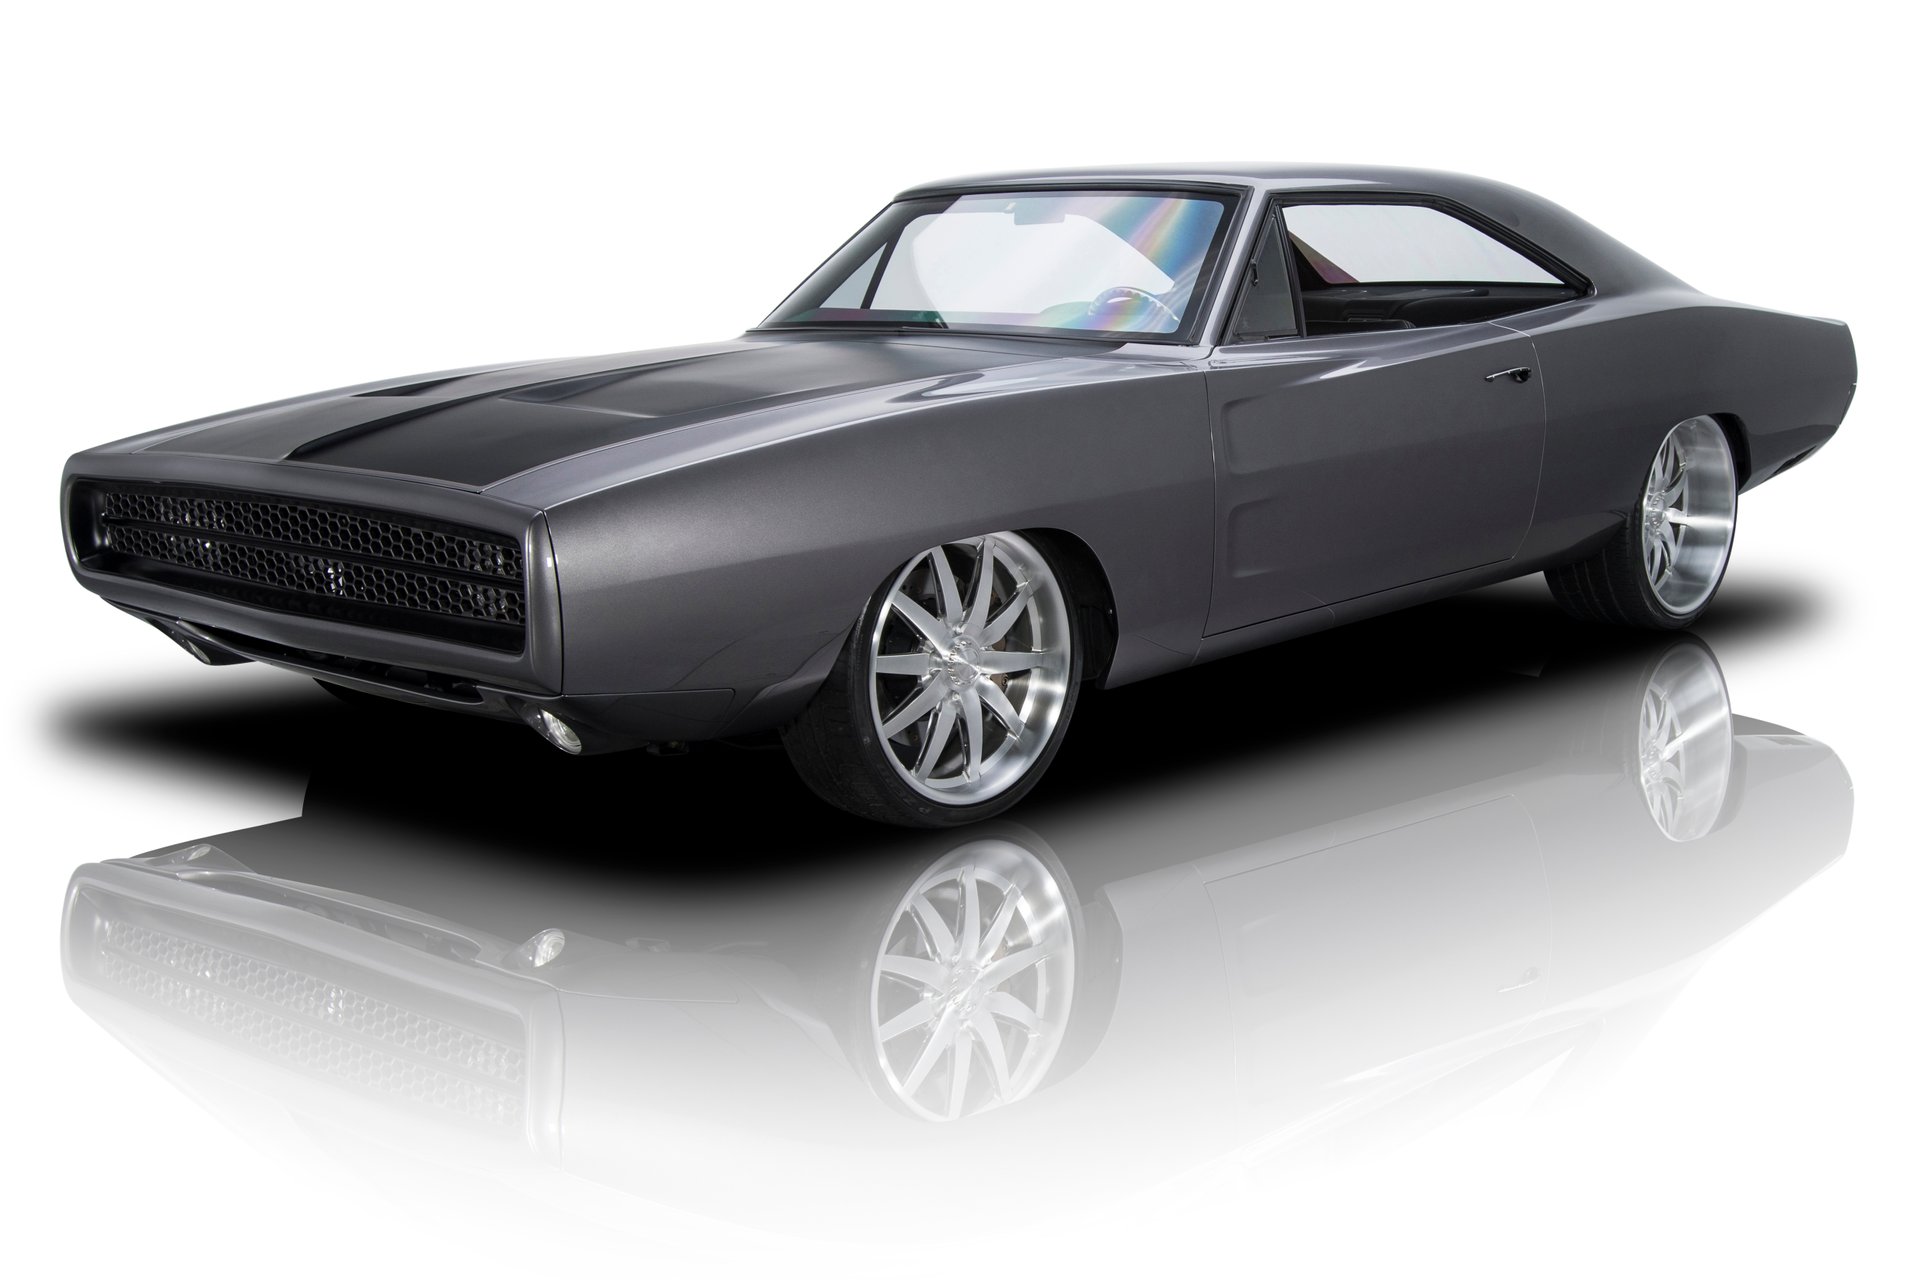 1970 dodge charger